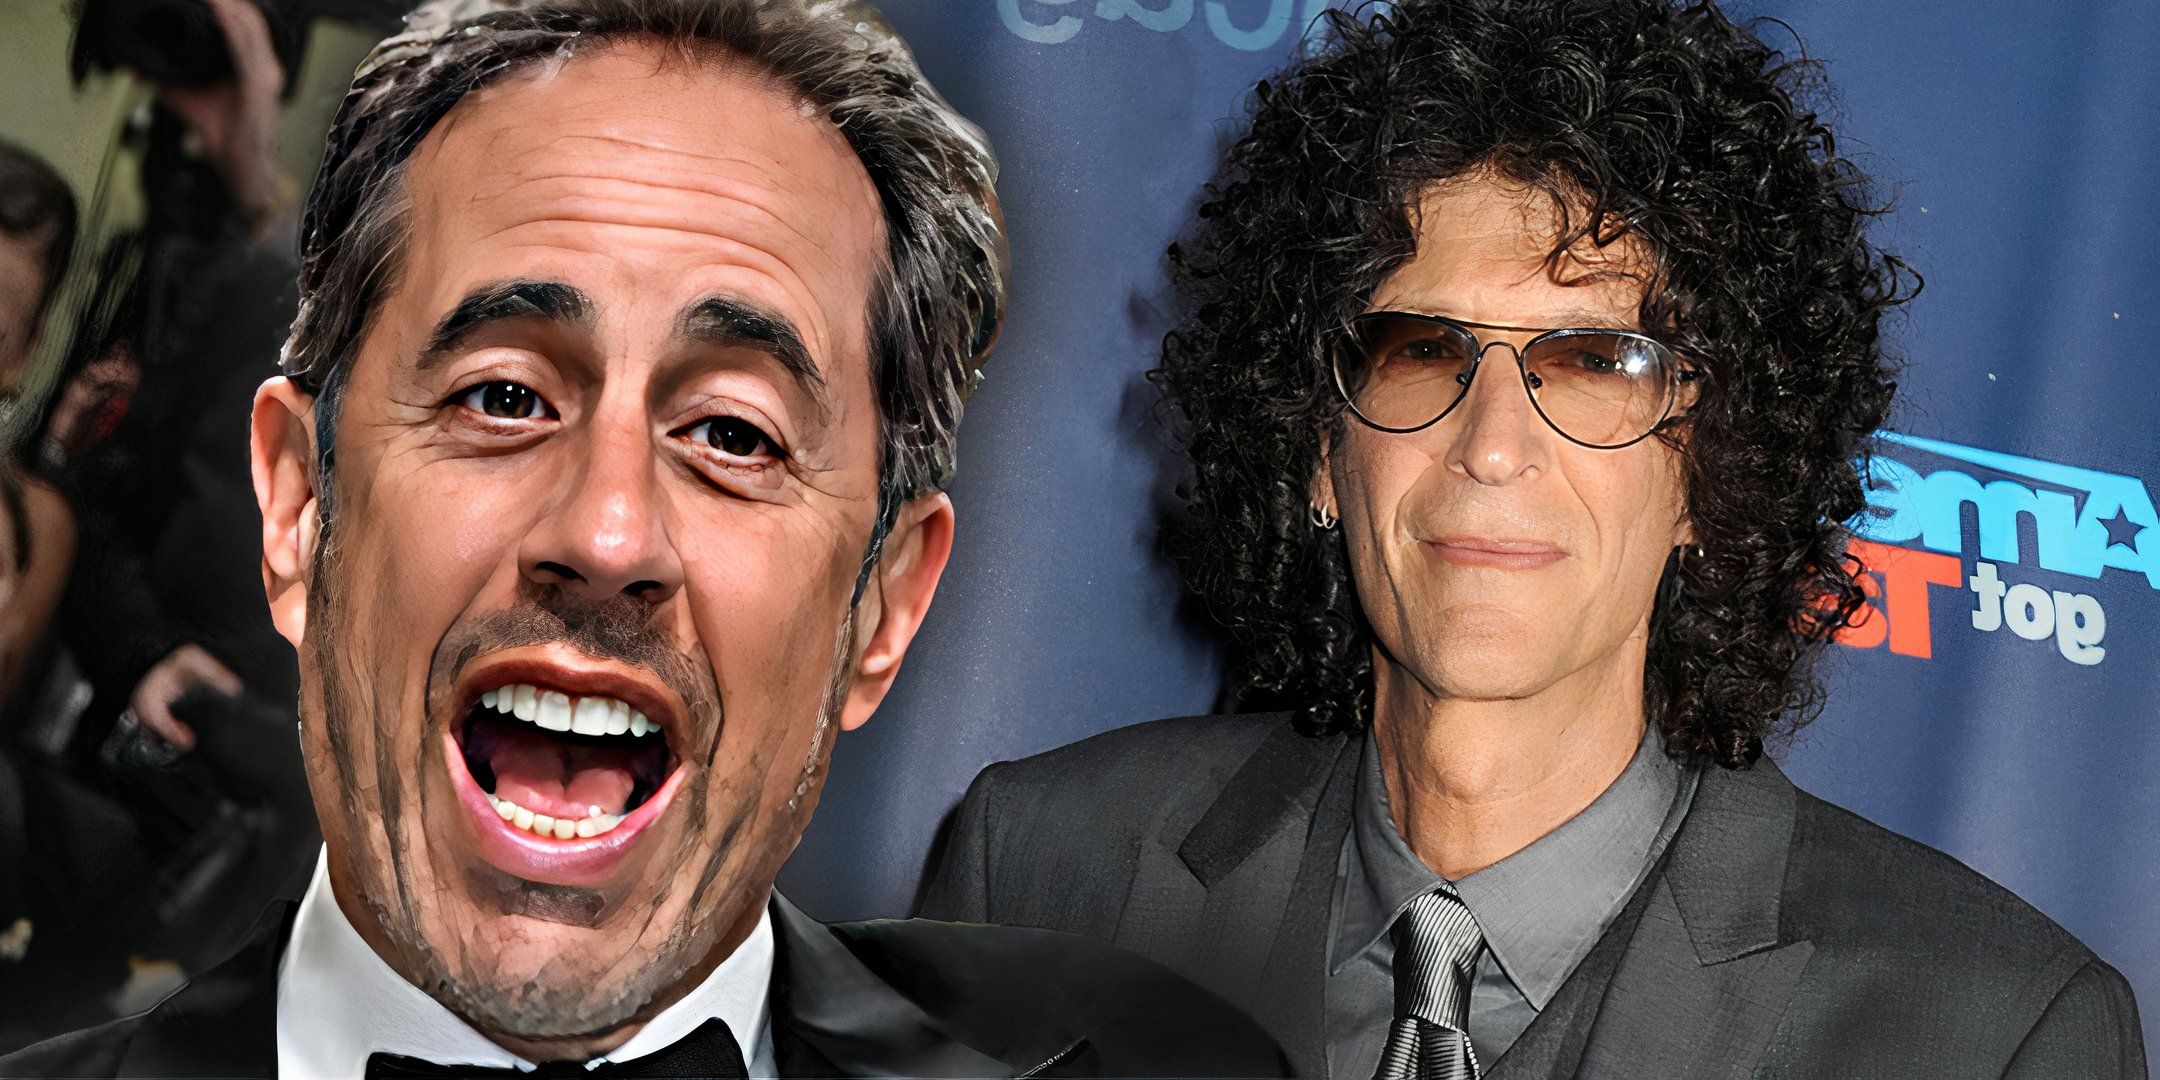 Howard Stern and Jerry Seinfeld feud